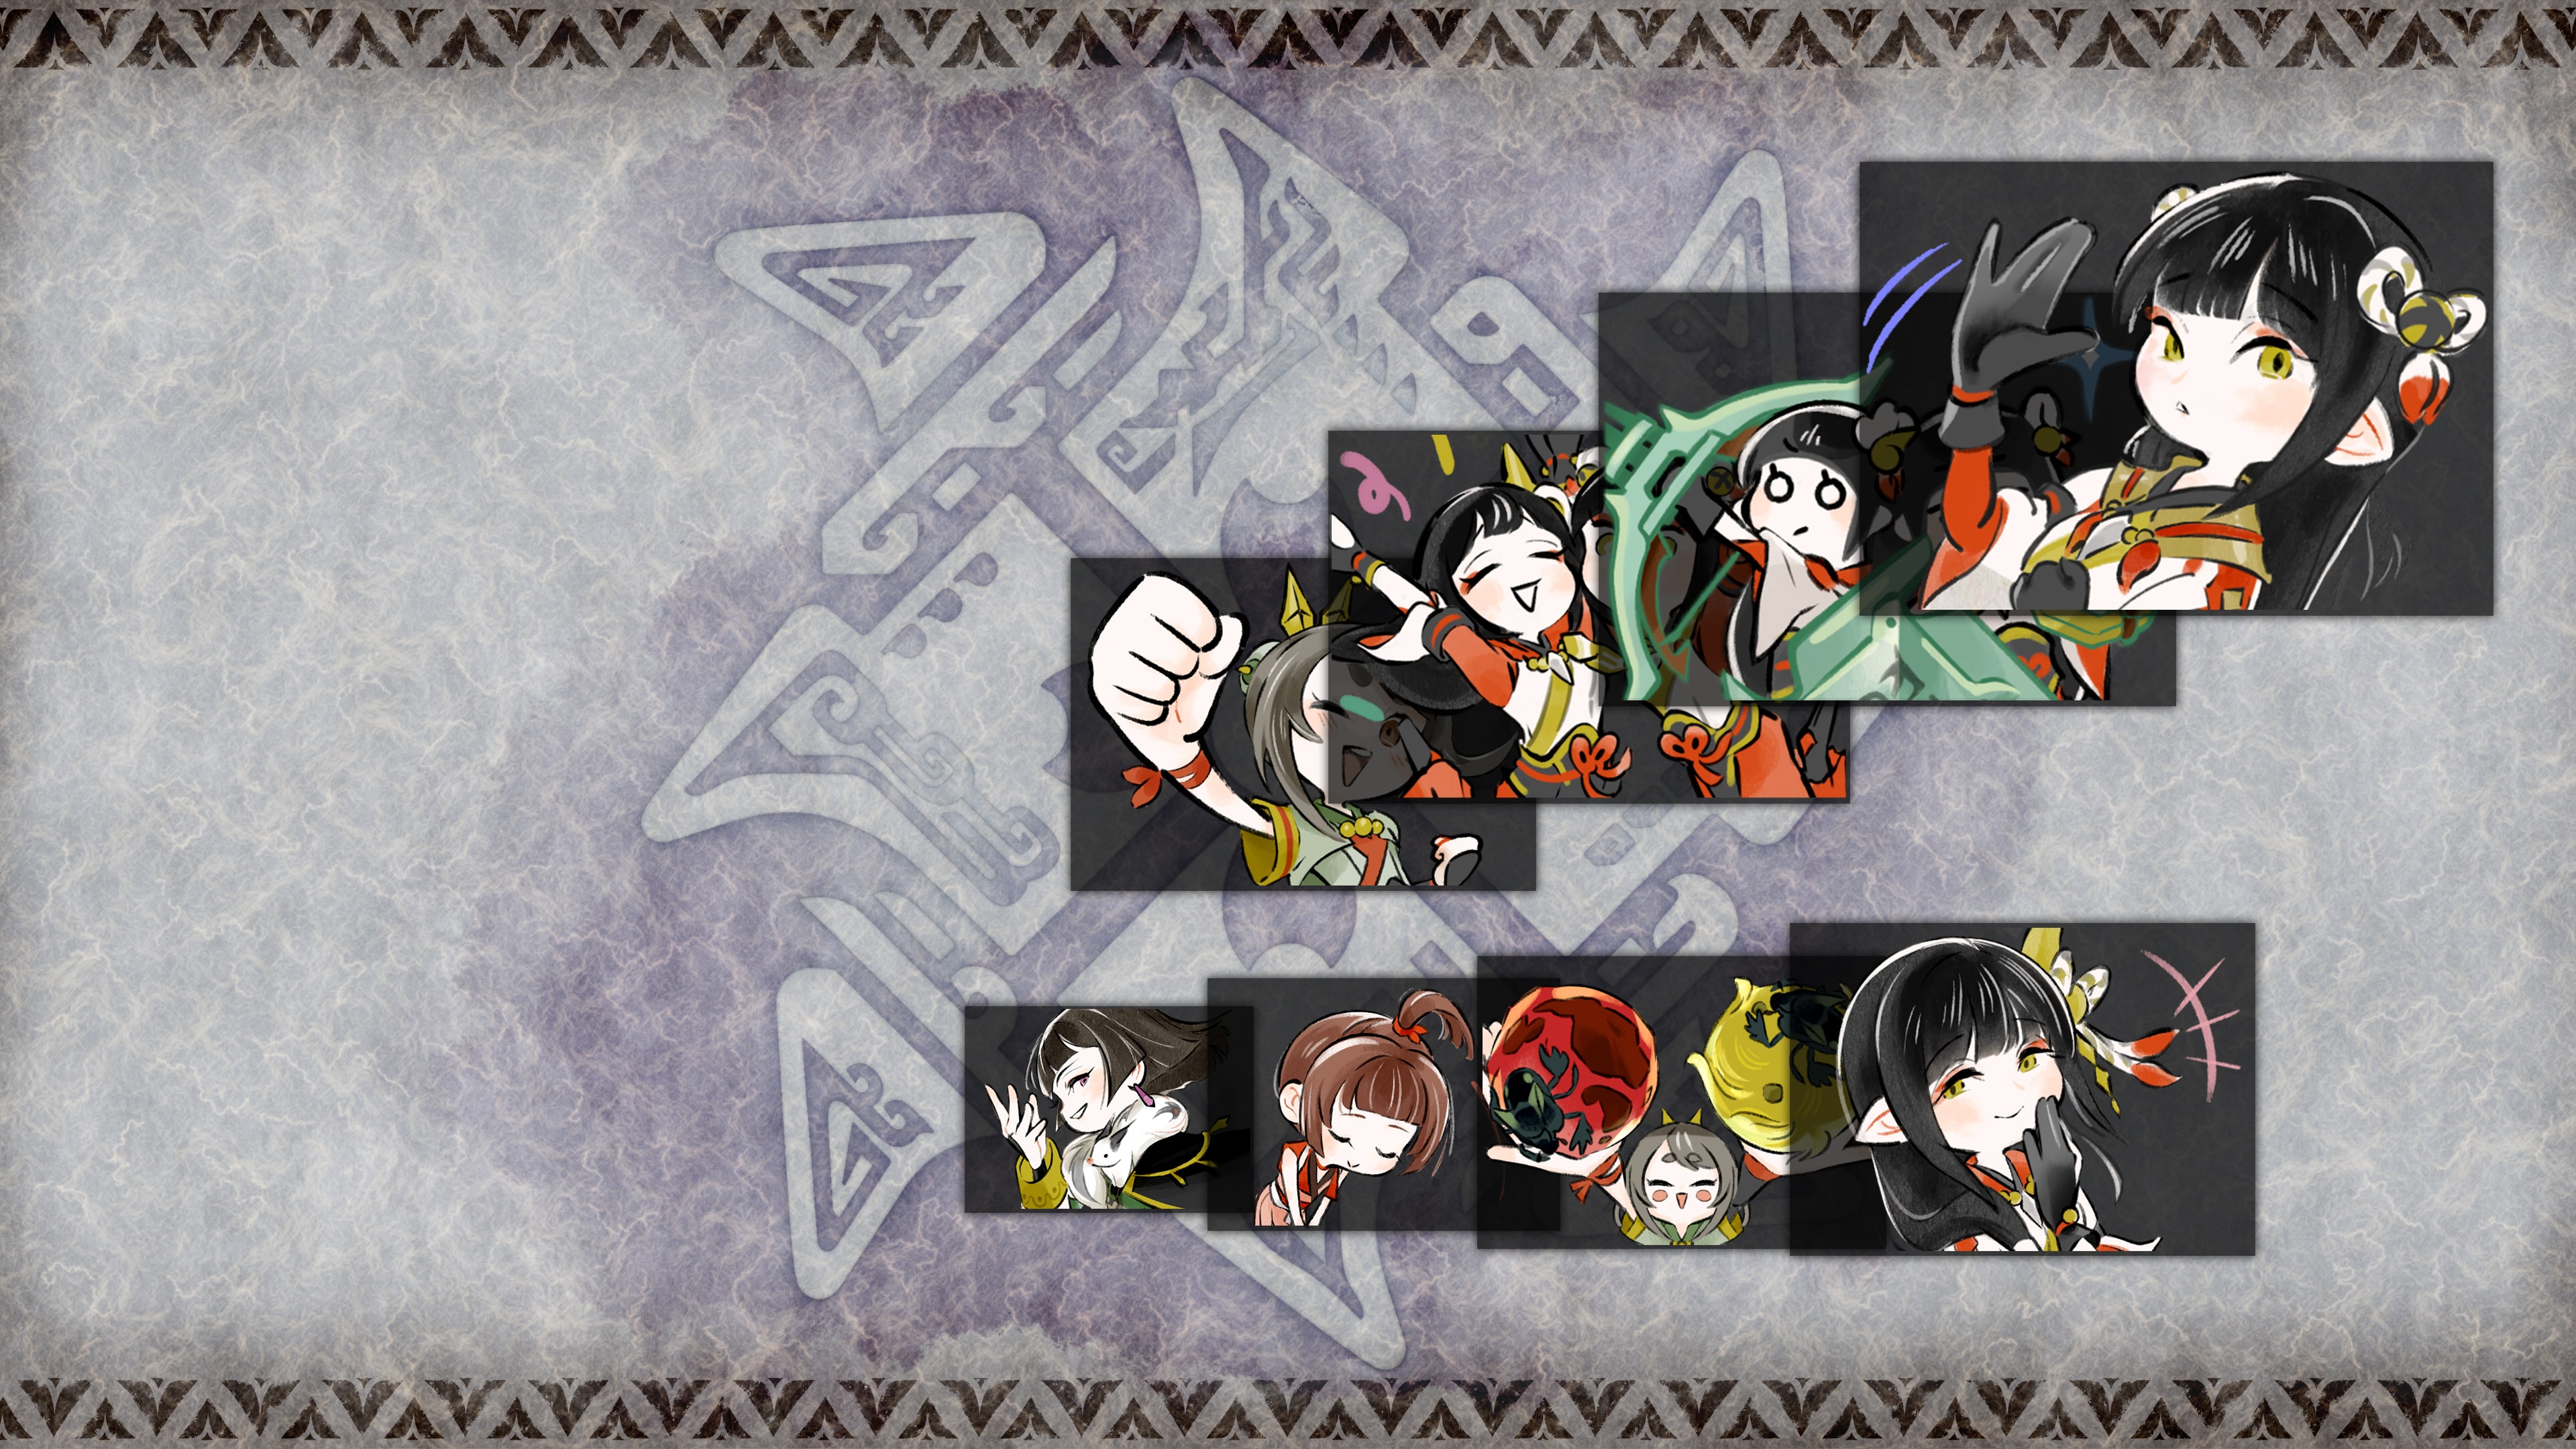 Monster Hunter Rise - "Special Stickers 4" sticker set